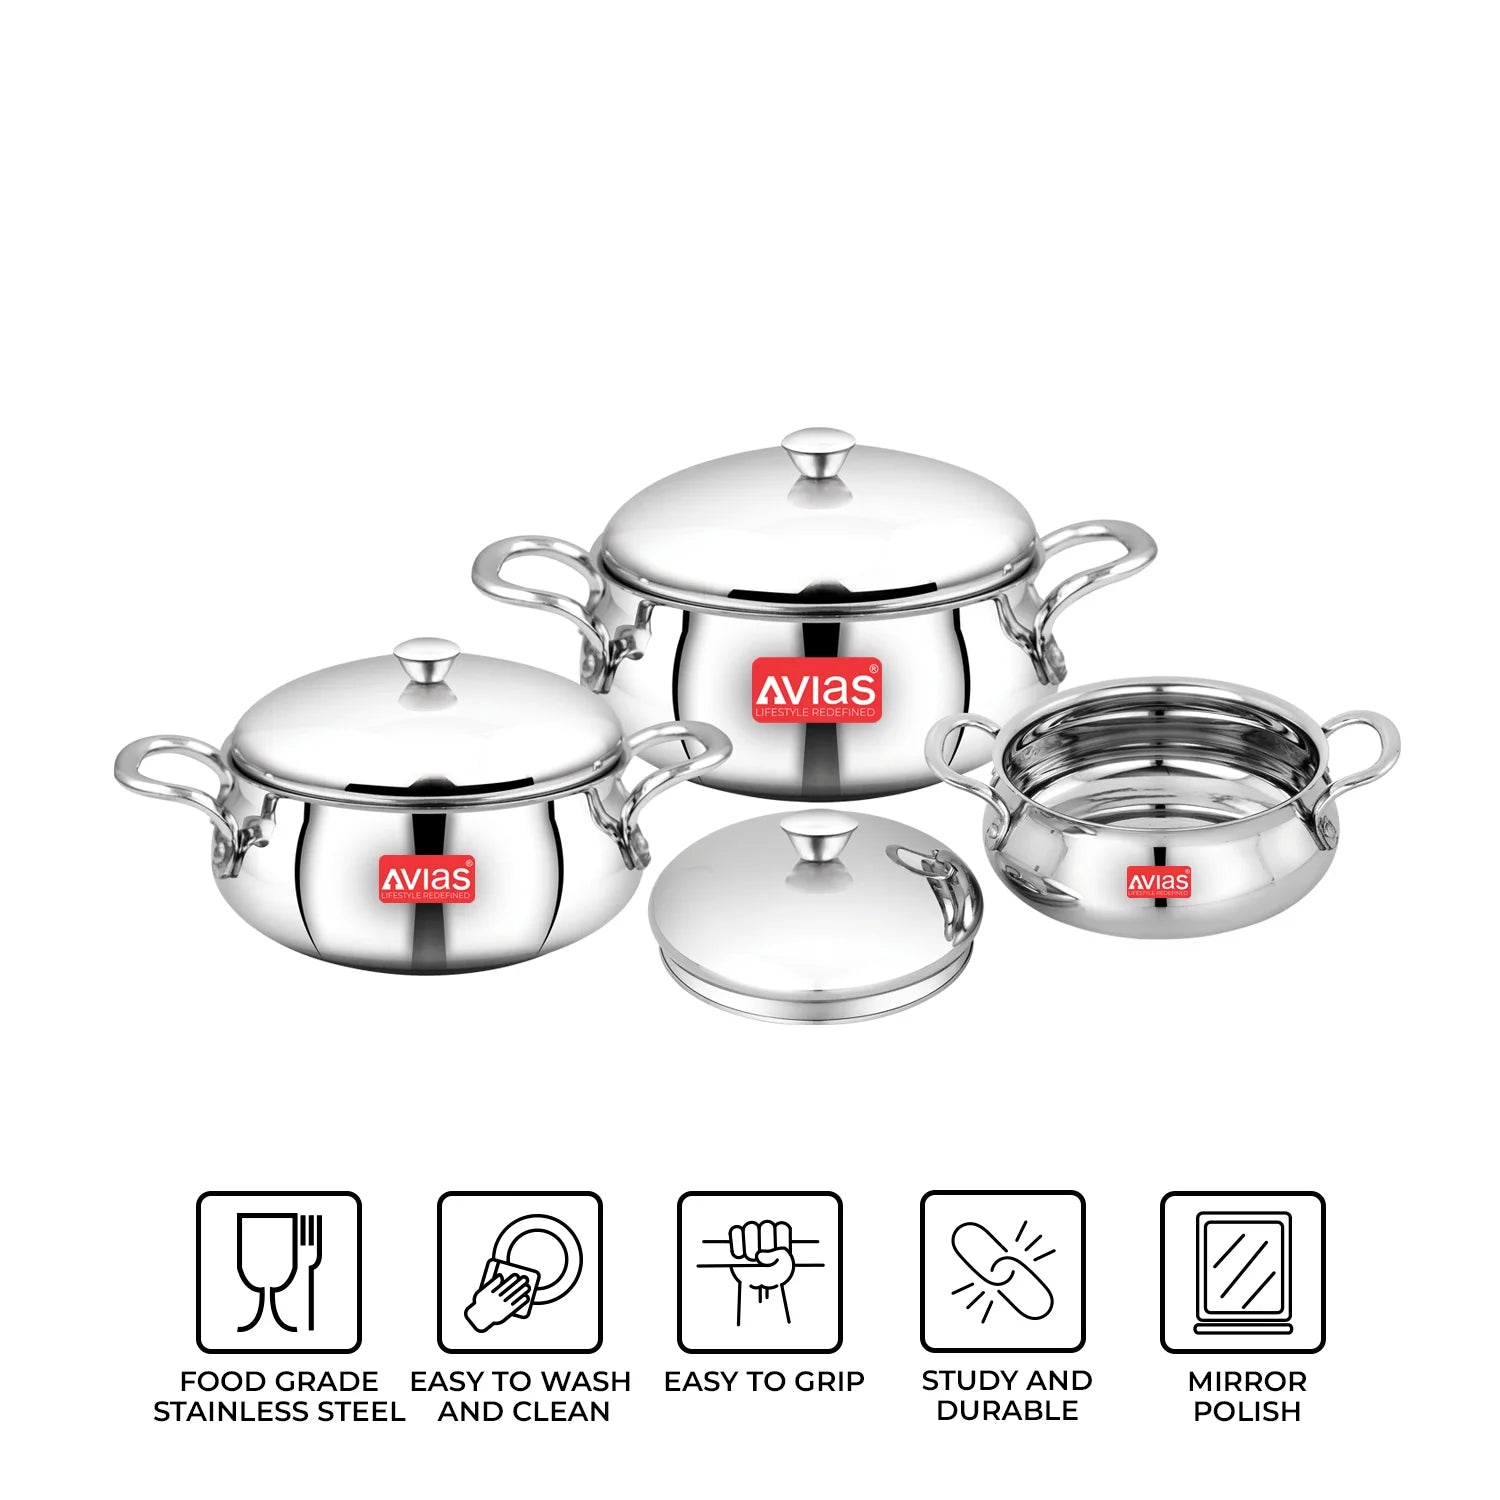 AVIAS Aroma High-quality stainless steel Handi Set features